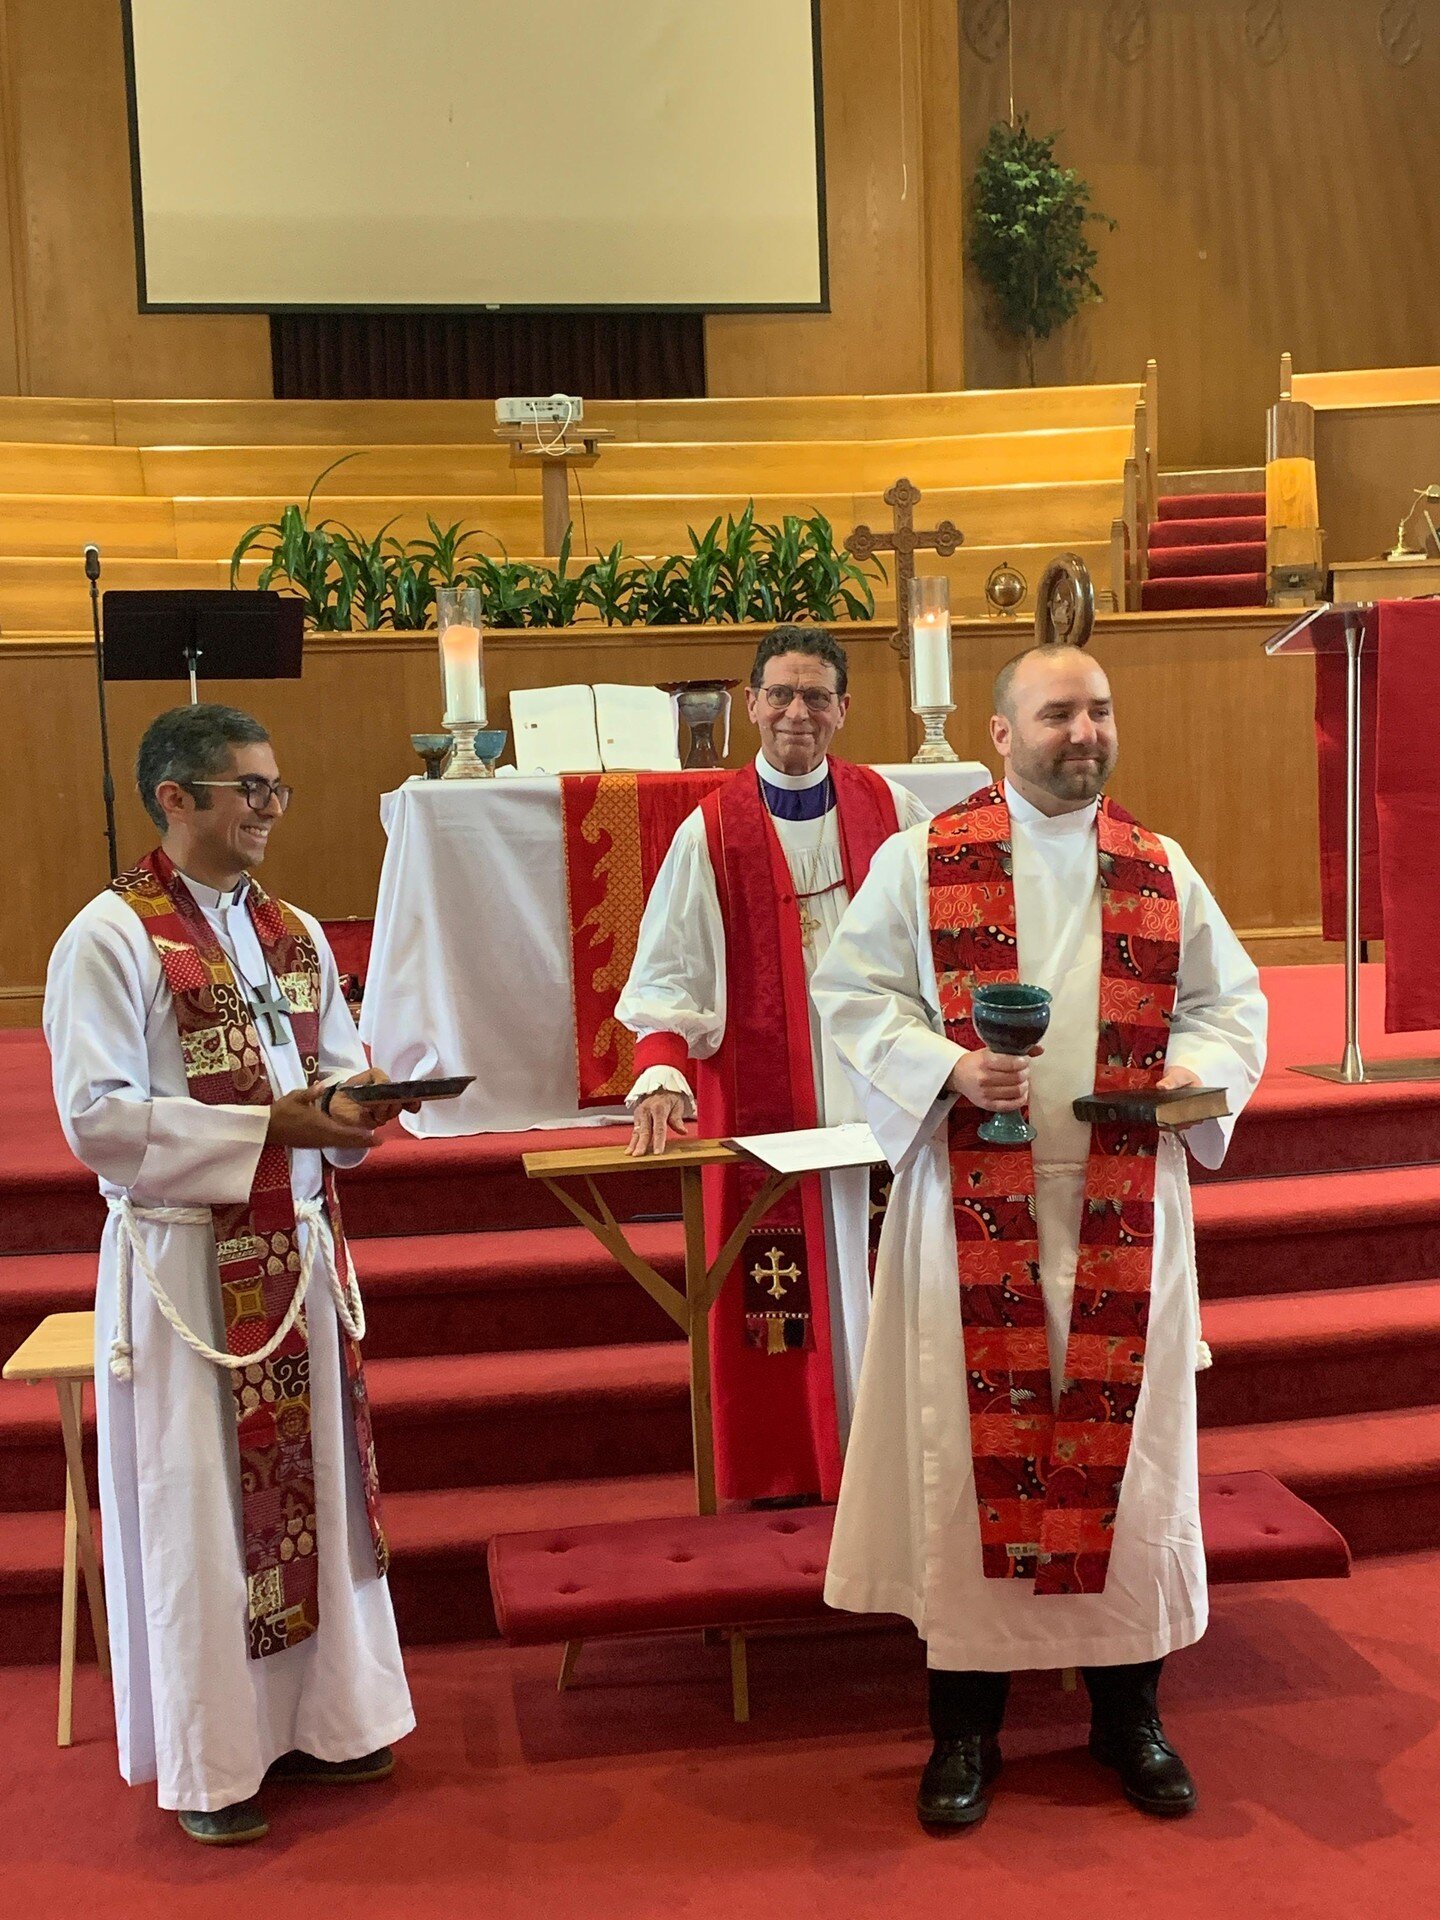 This past Sunday it was our great joy to host the ordination service for our wonderful curate, Jeff Simpson, to the priesthood! @adchristourhope
.
.
.
.
.
.
.
.
.
.
#ordination #ACNA #adchristourhope #anglicanchurchlife